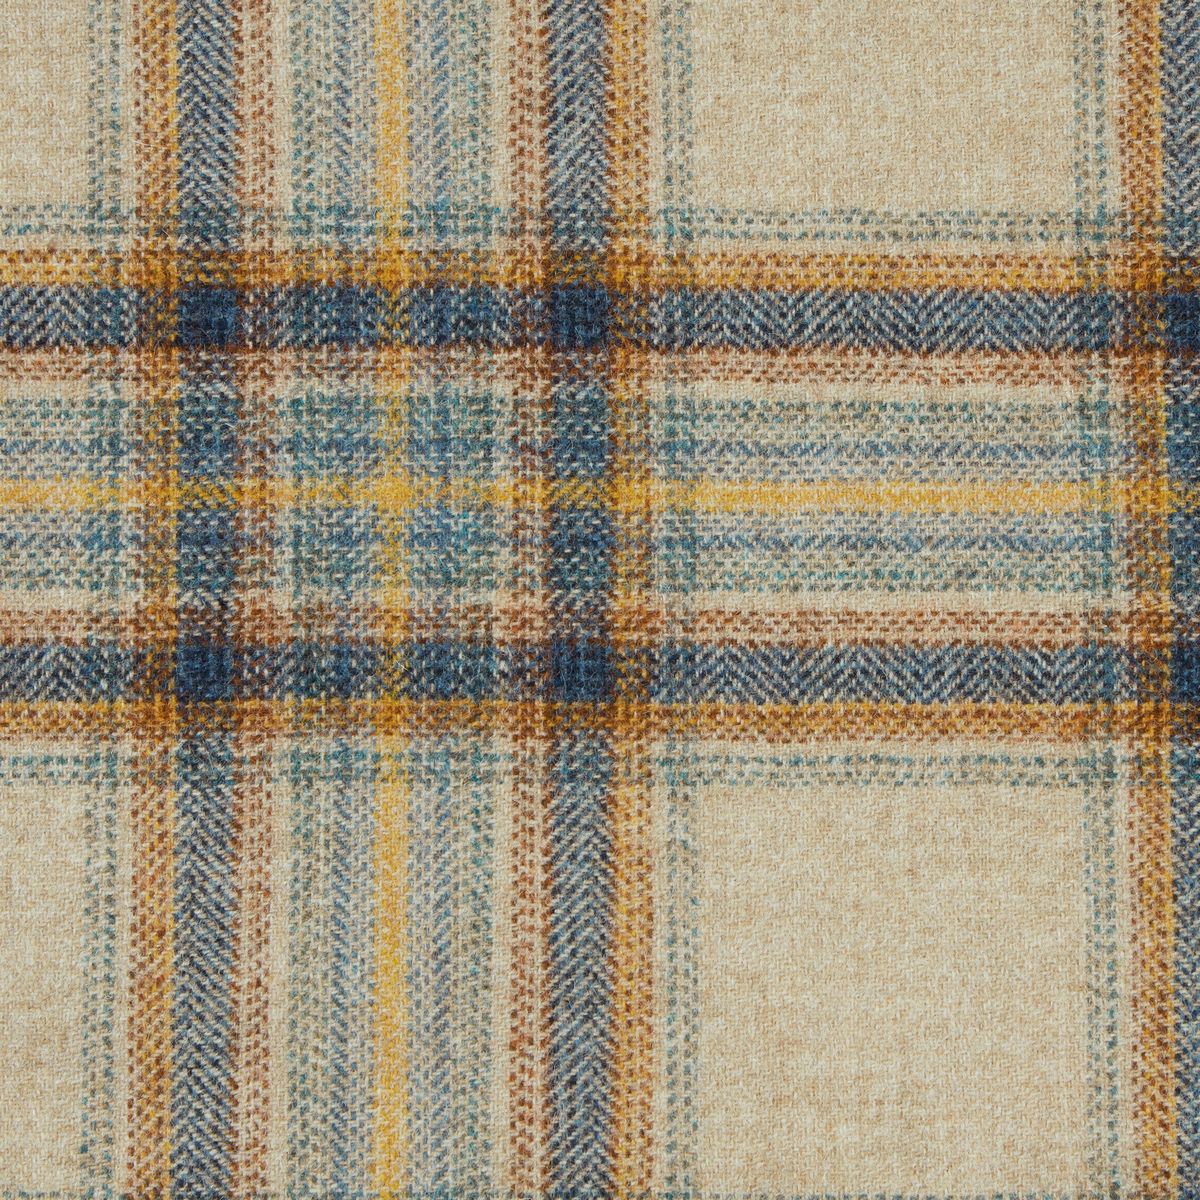 Wentworth Check Natural Denim Fabric by Abraham Moon